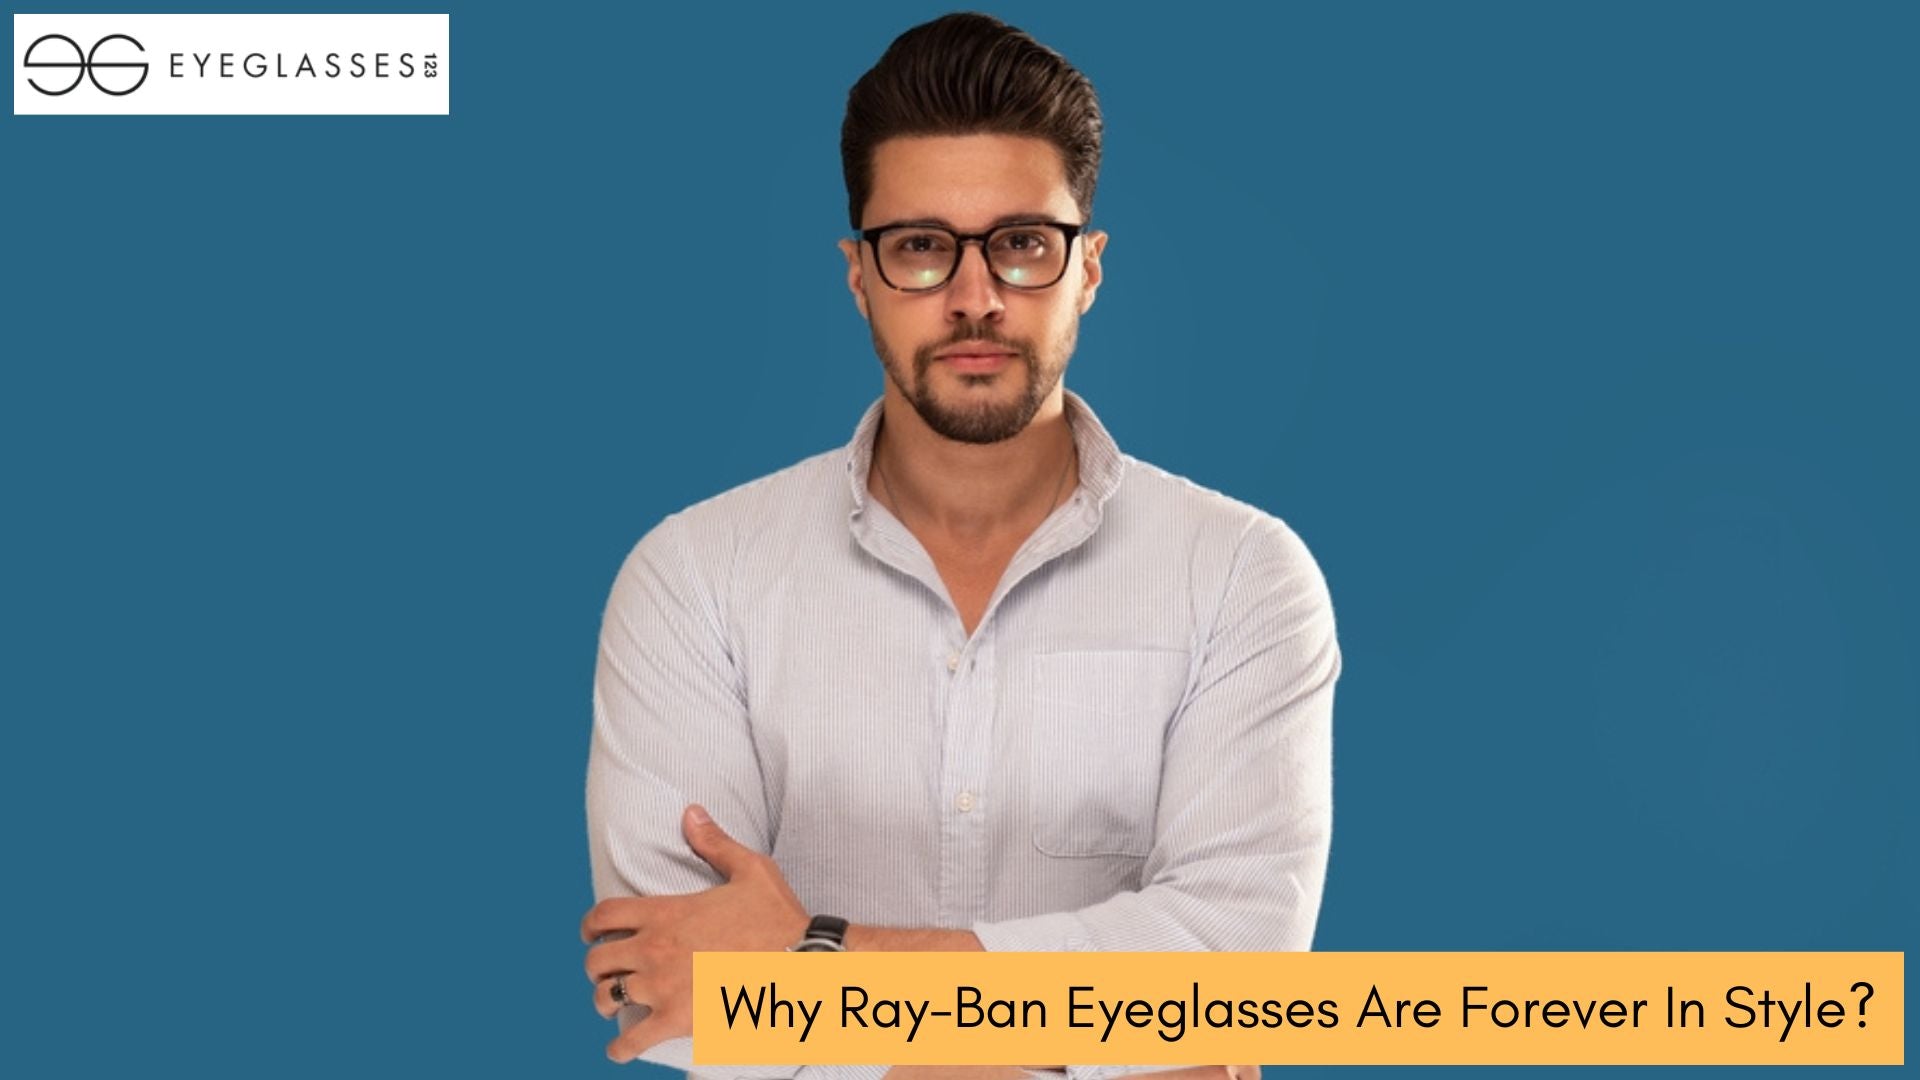 Why Ray-Ban Eyeglasses Are Forever In Style?